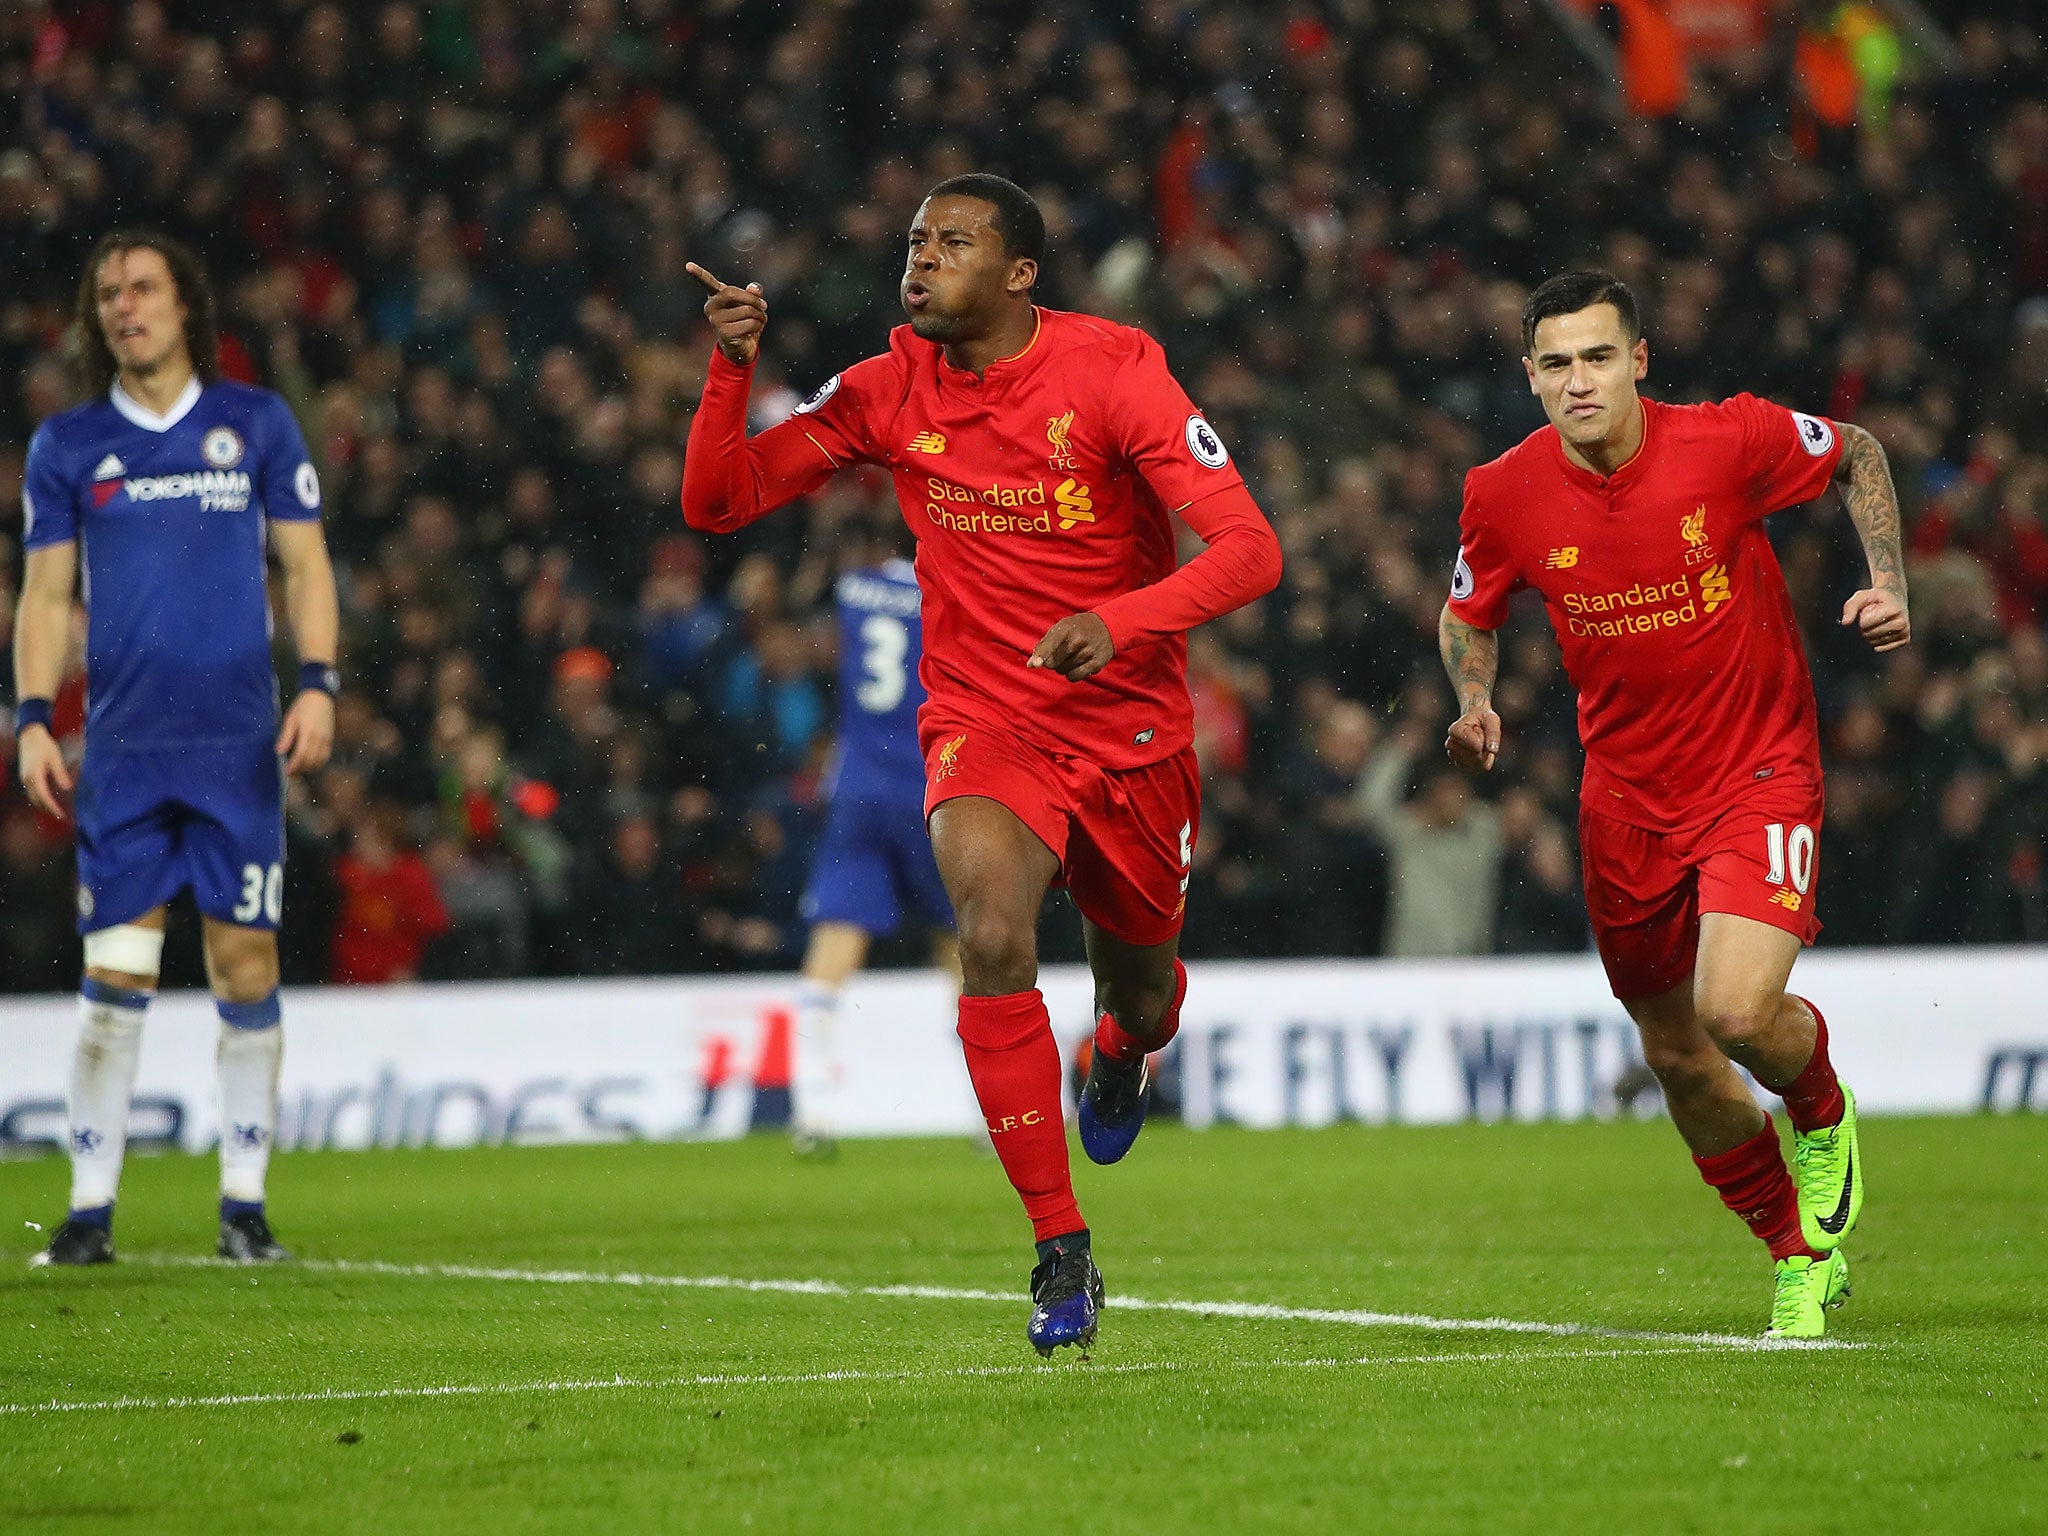 Liverpool vs Chelsea - Premier League: What time does it start, where can I watch it and what are the odds?